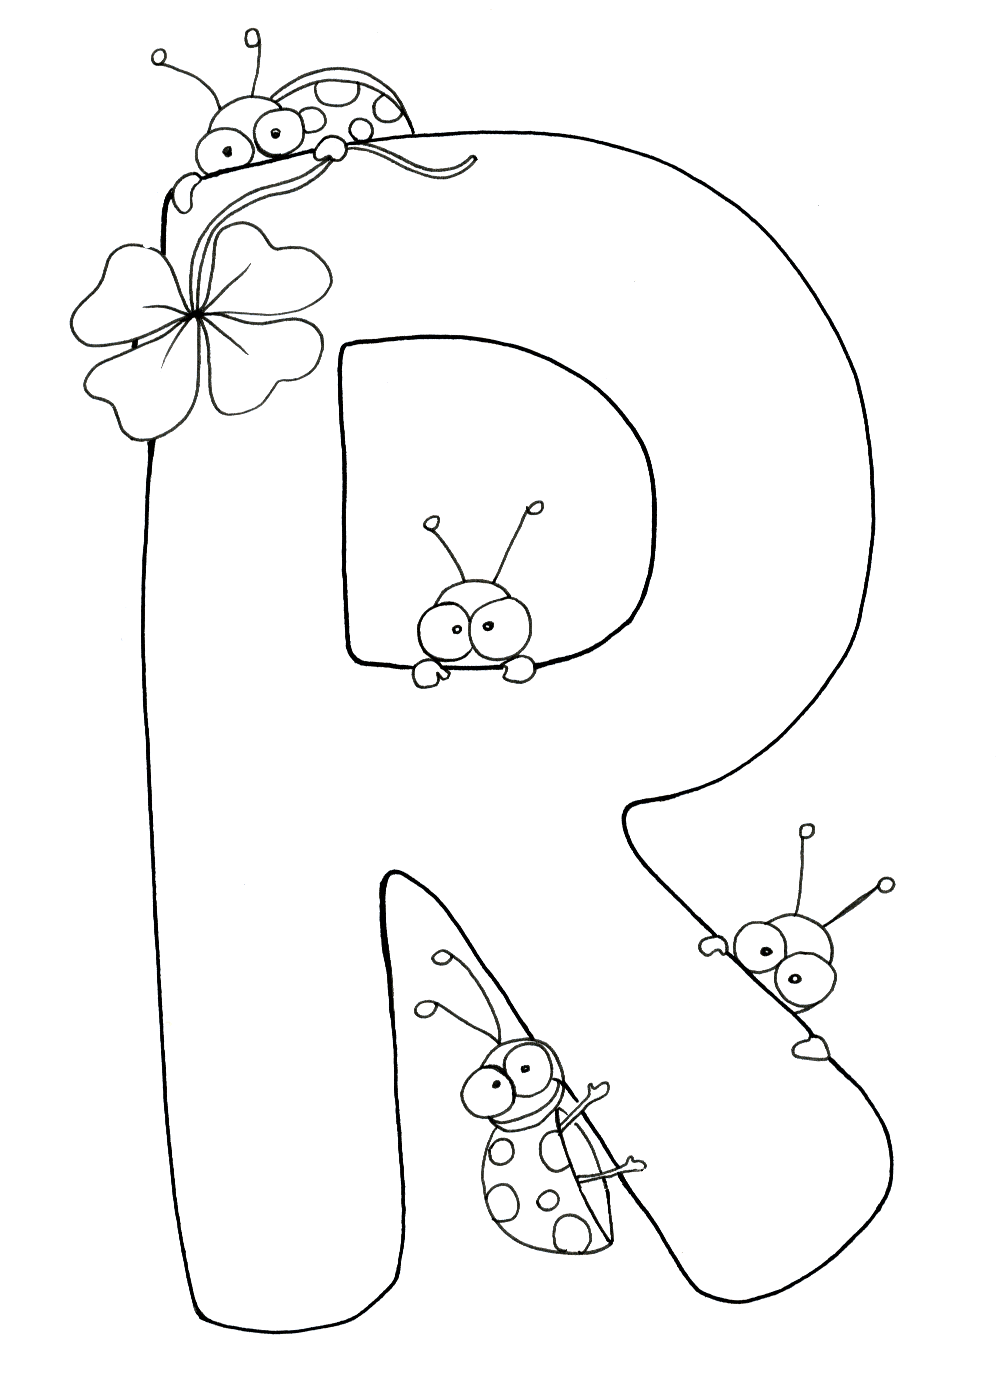 r a w coloring pages - photo #11